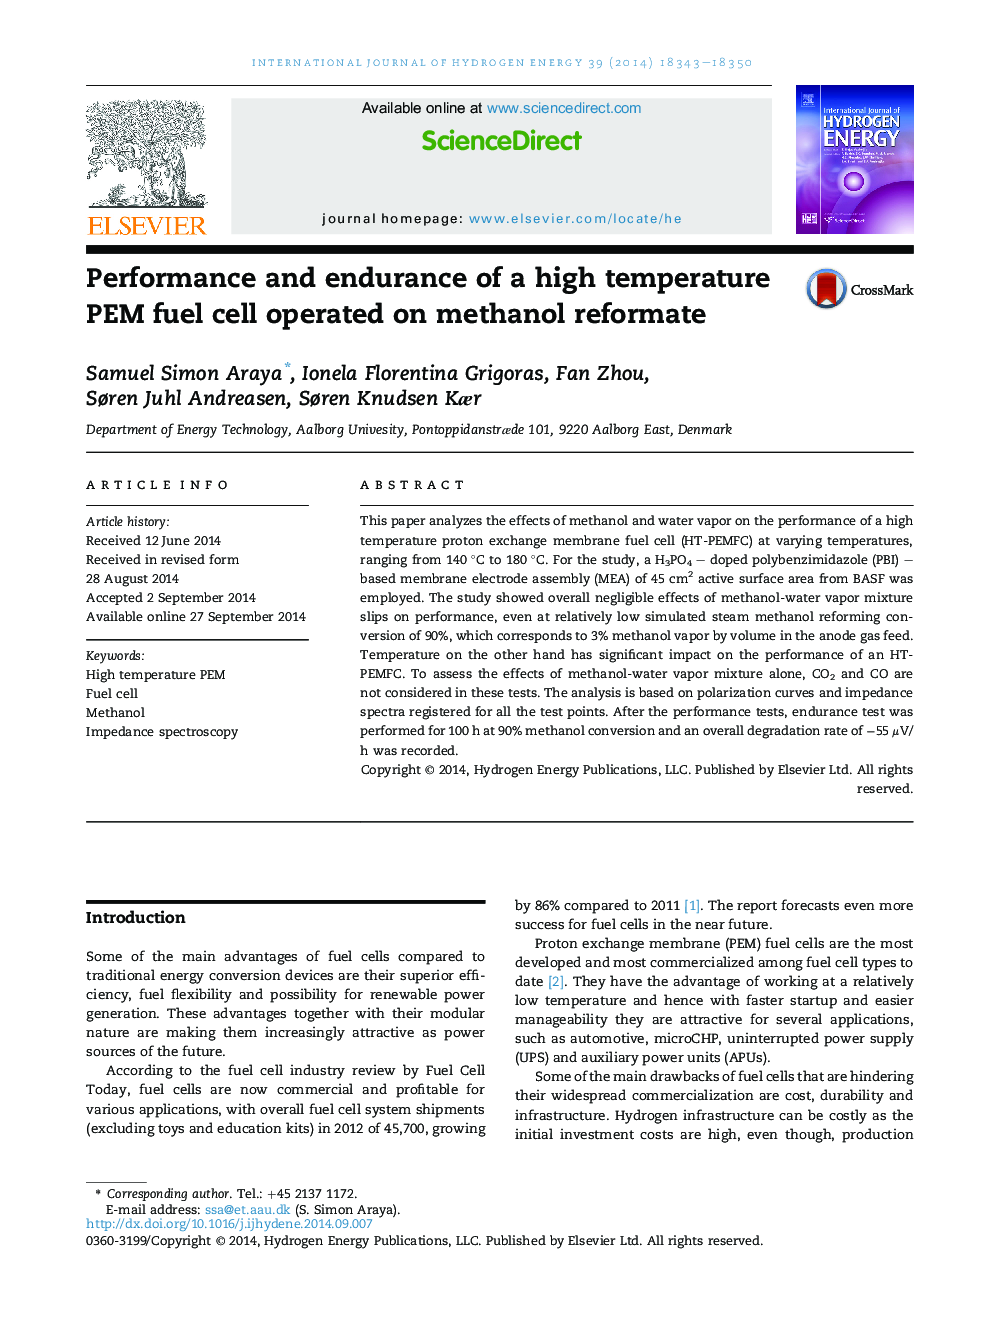 Performance and endurance of a high temperature PEM fuel cell operated on methanol reformate